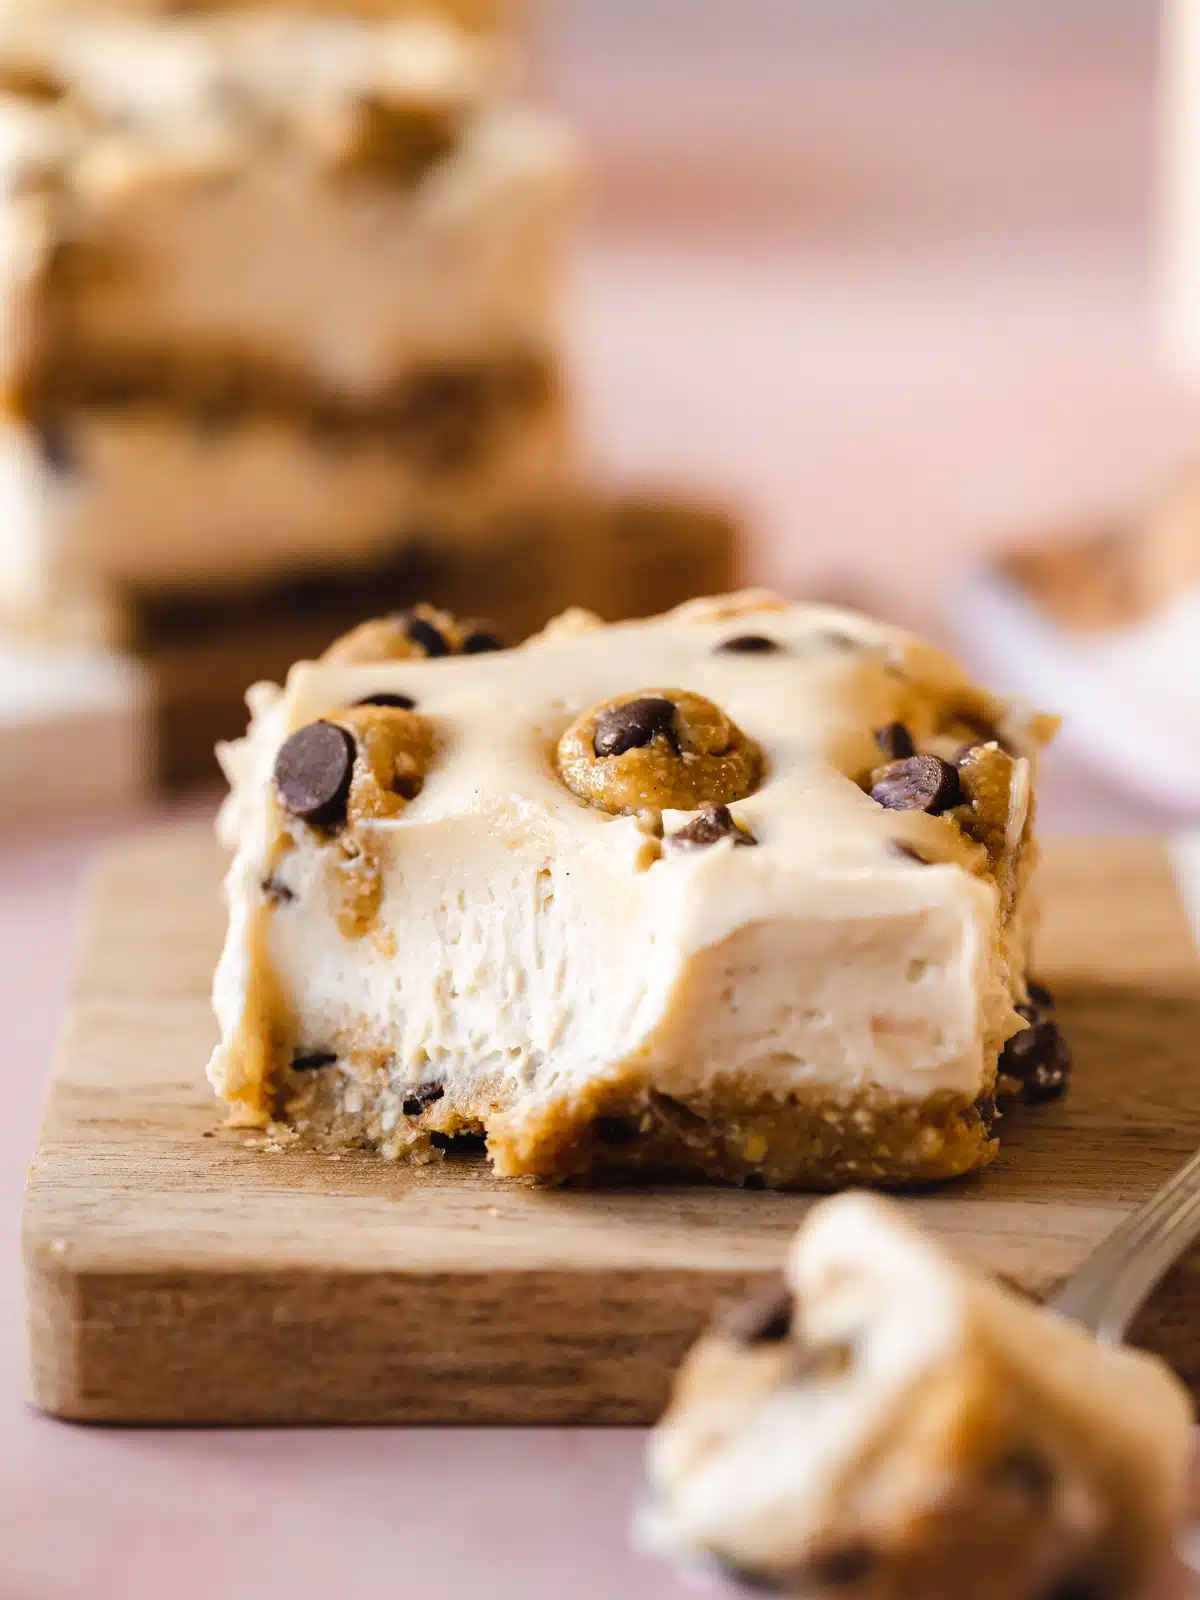 One vegan chocolate chip cookie dough cheesecake bar on a wooden plate with a bite taken out to show the creamy consistency.